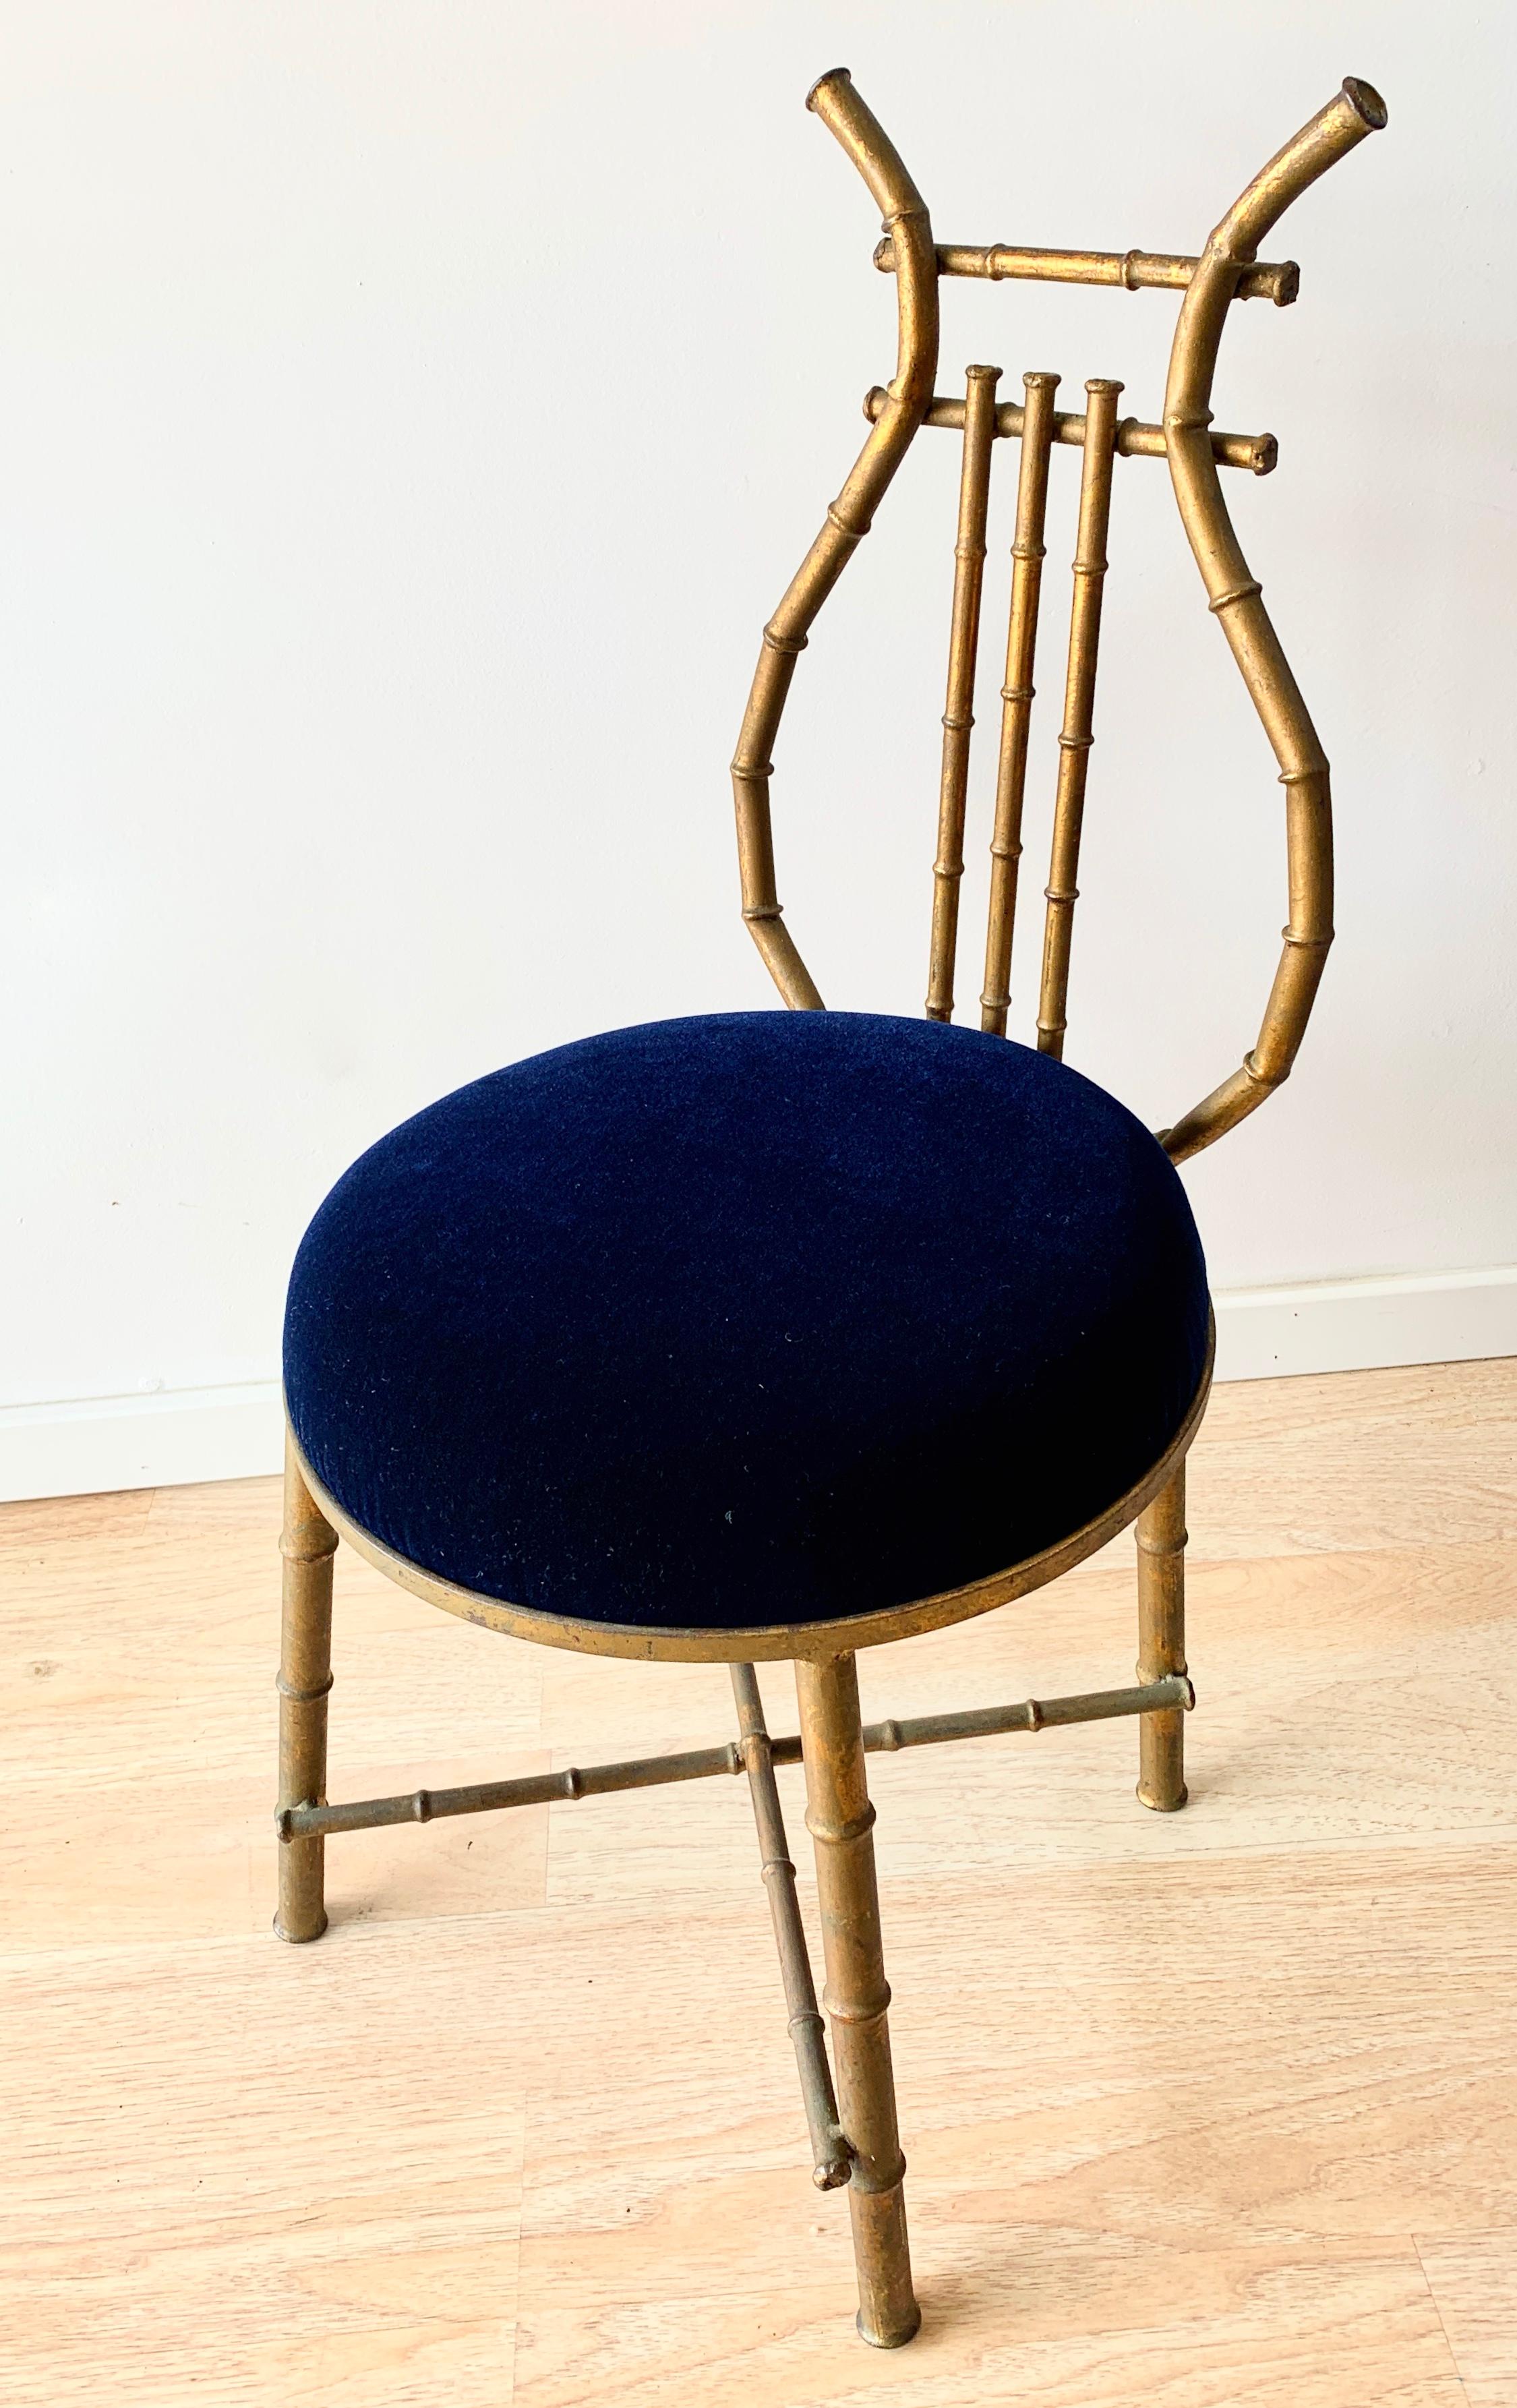 A unique chair with a lire shaped back and upholstered in cerulean blue mohair. A small vanity sized chair, light weight and perfectly suited for a dressing room, music room or childs space.